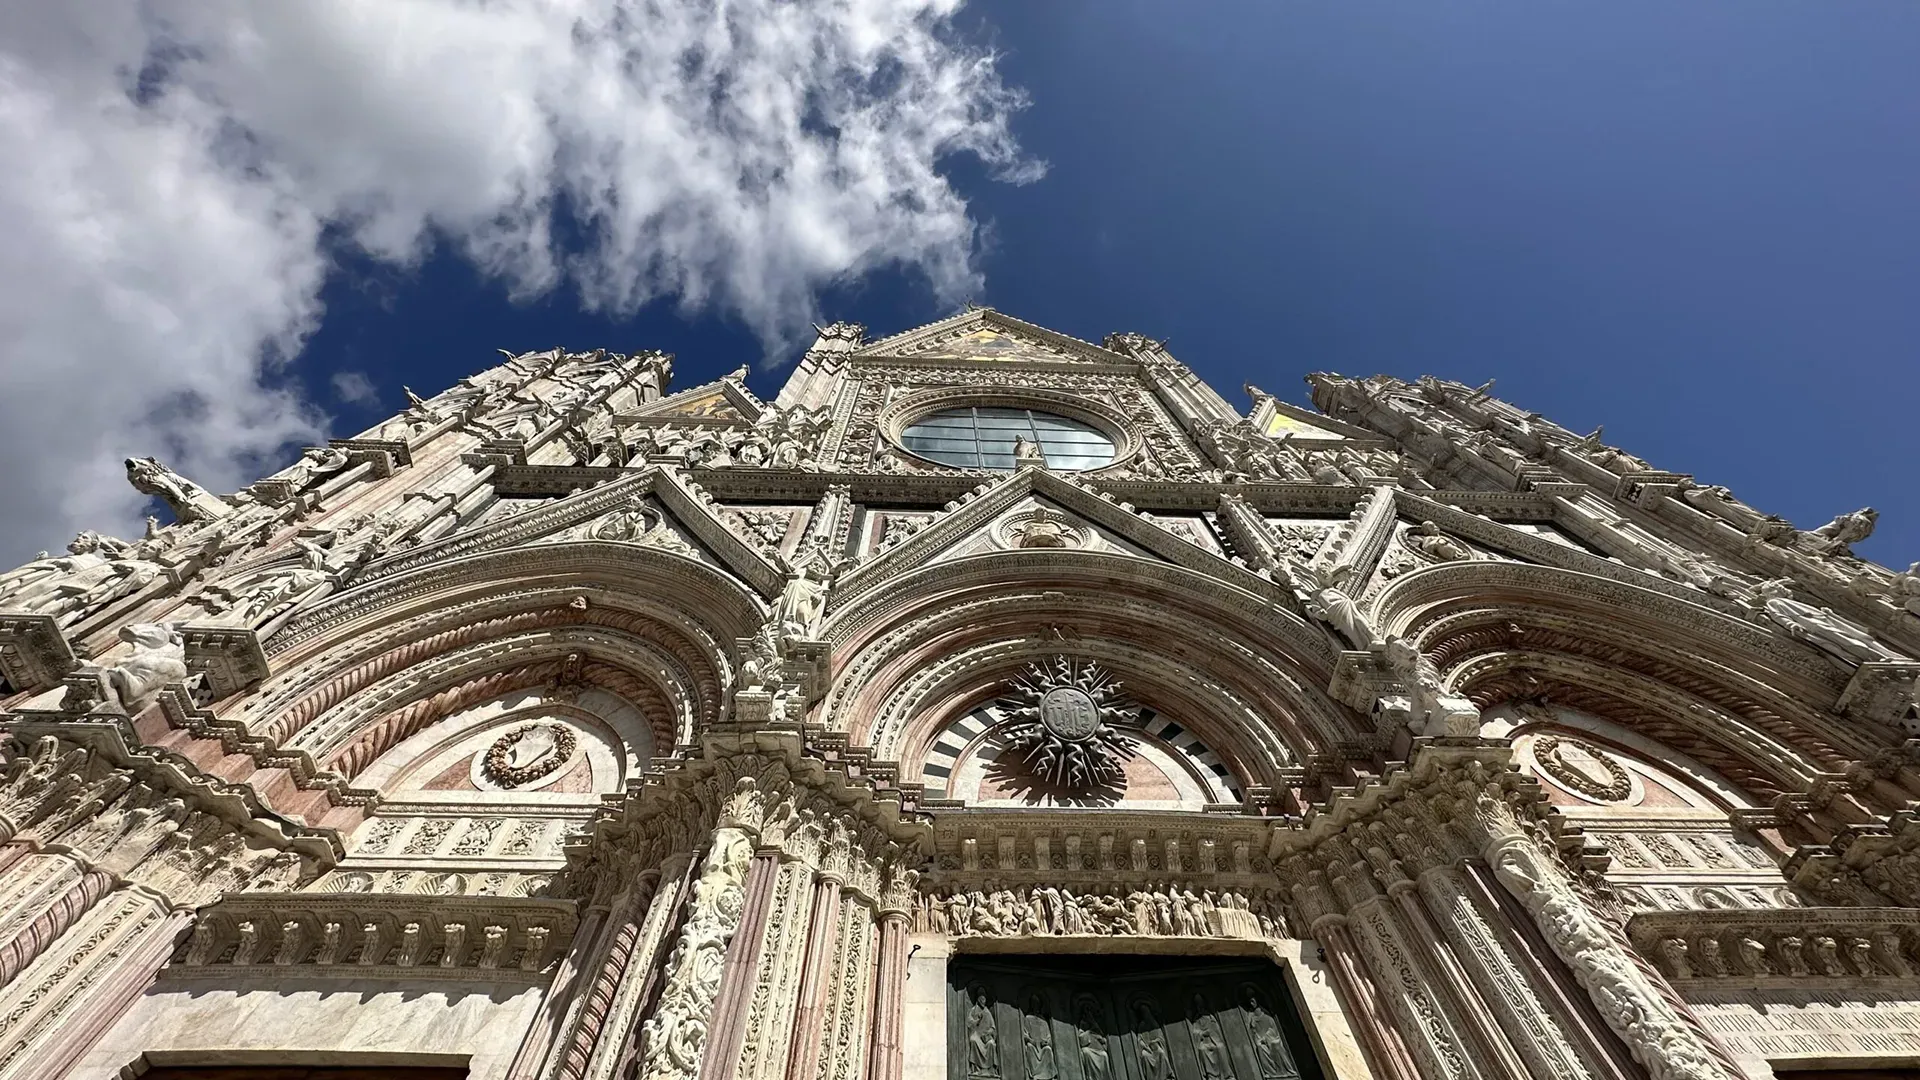 Fascade of the Duomo di Siena showing detailed stonework in black, white and red marble.